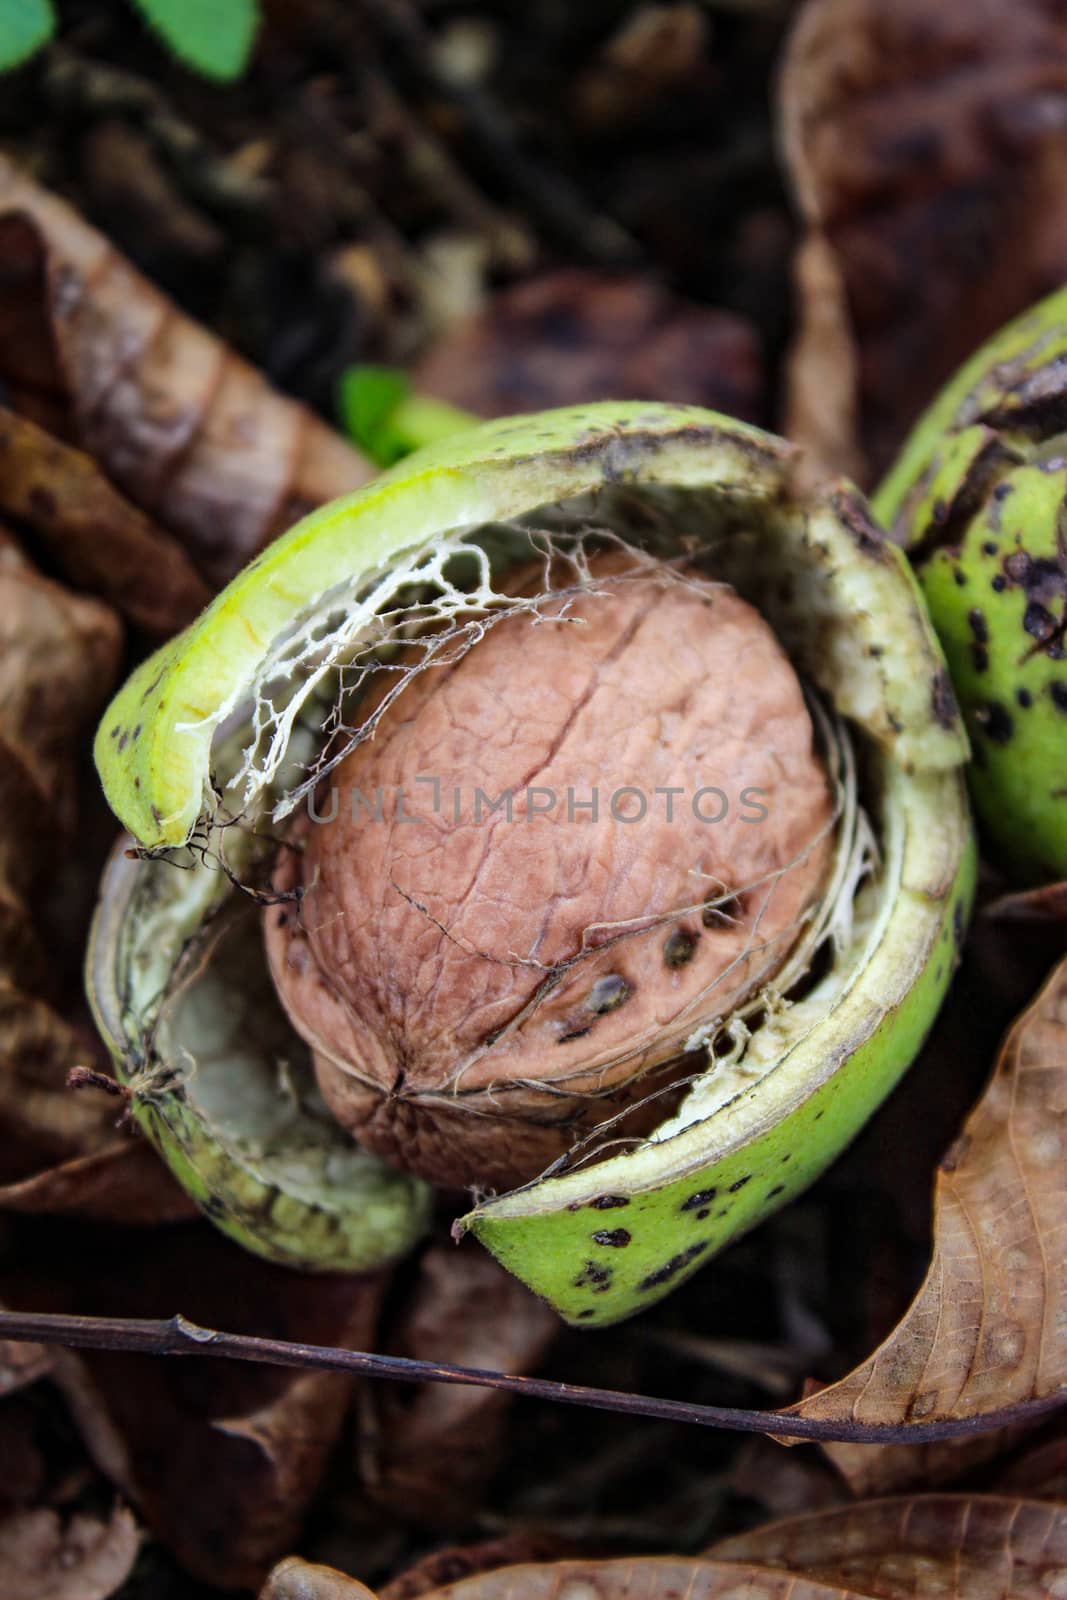 A ripe walnut with an open shell fell to the floor among the dried leaves. Vertical image. Zavidovici, Bosnia and Herzegovina.